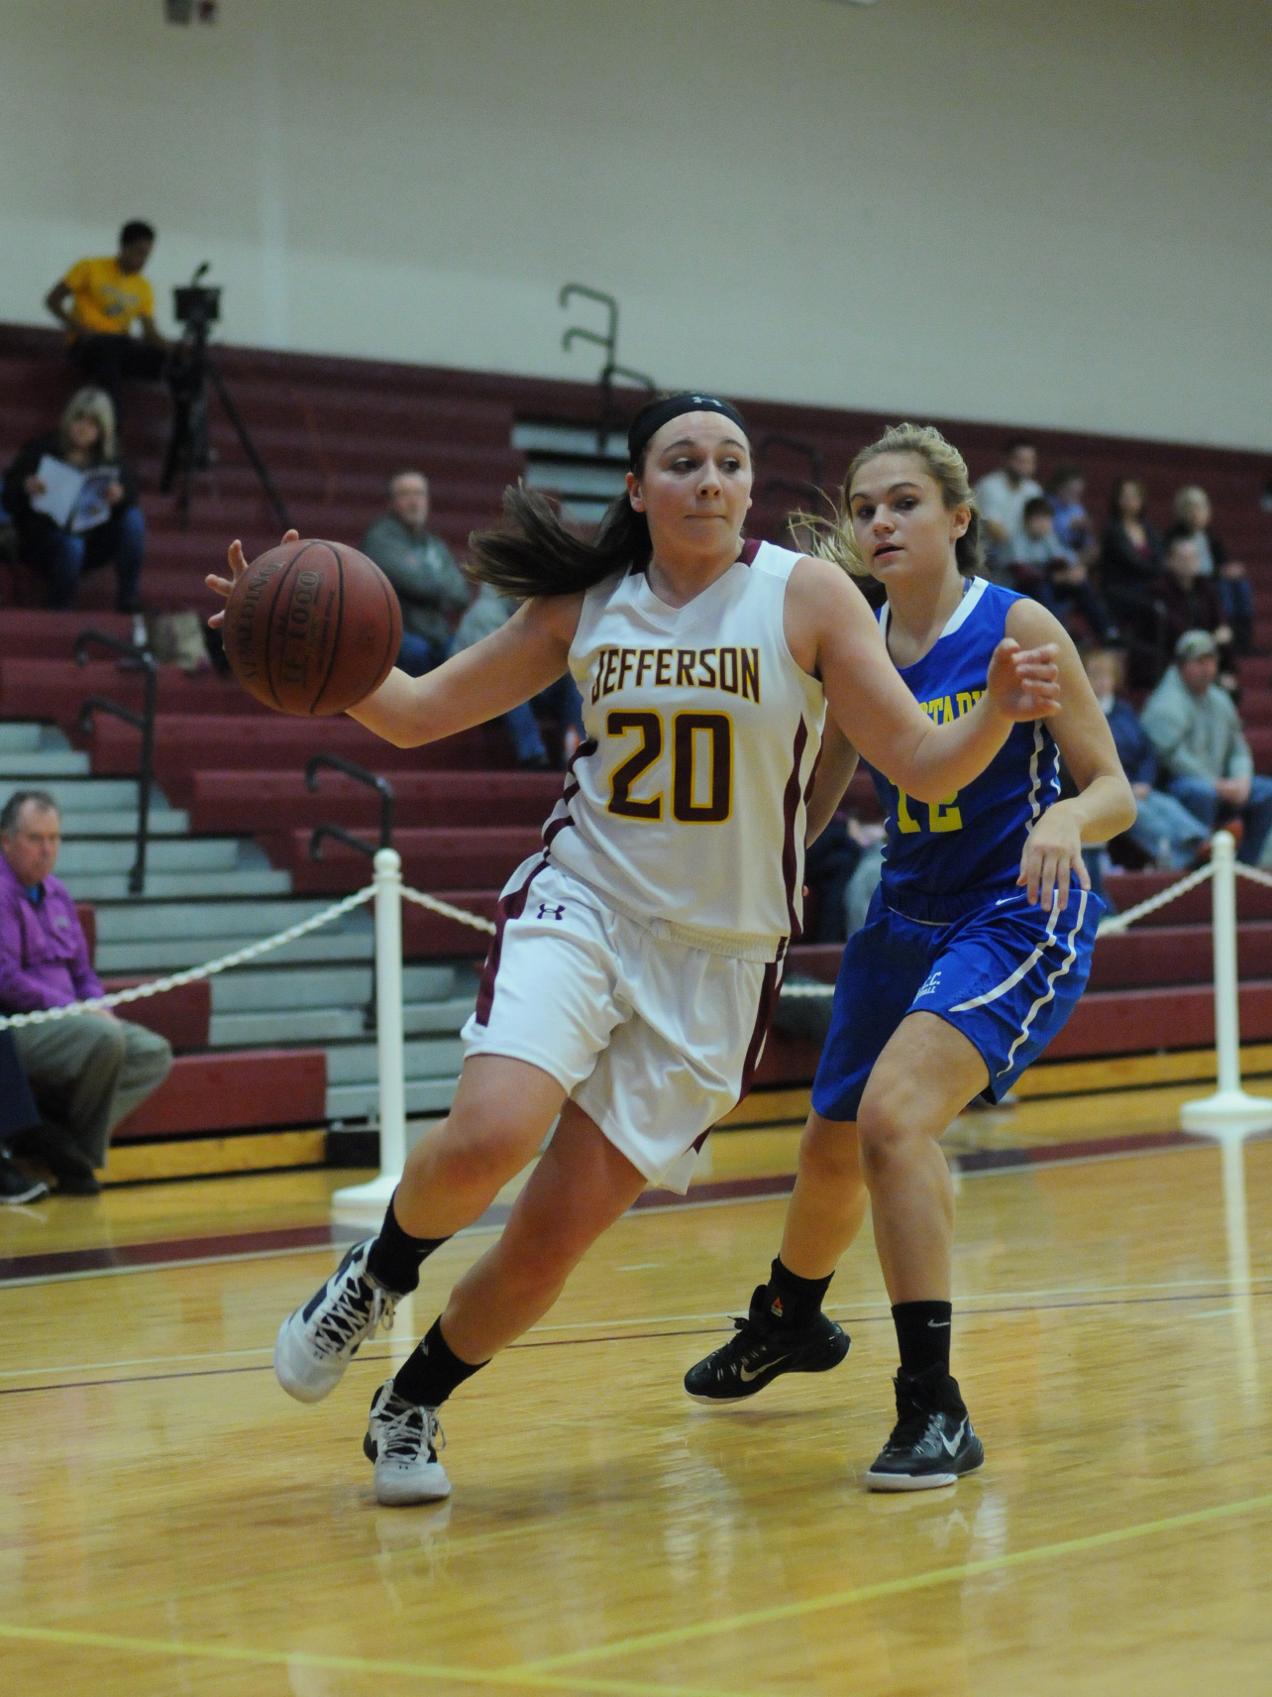 The Lady Cannoneers Pull Together 3 Straight Wins